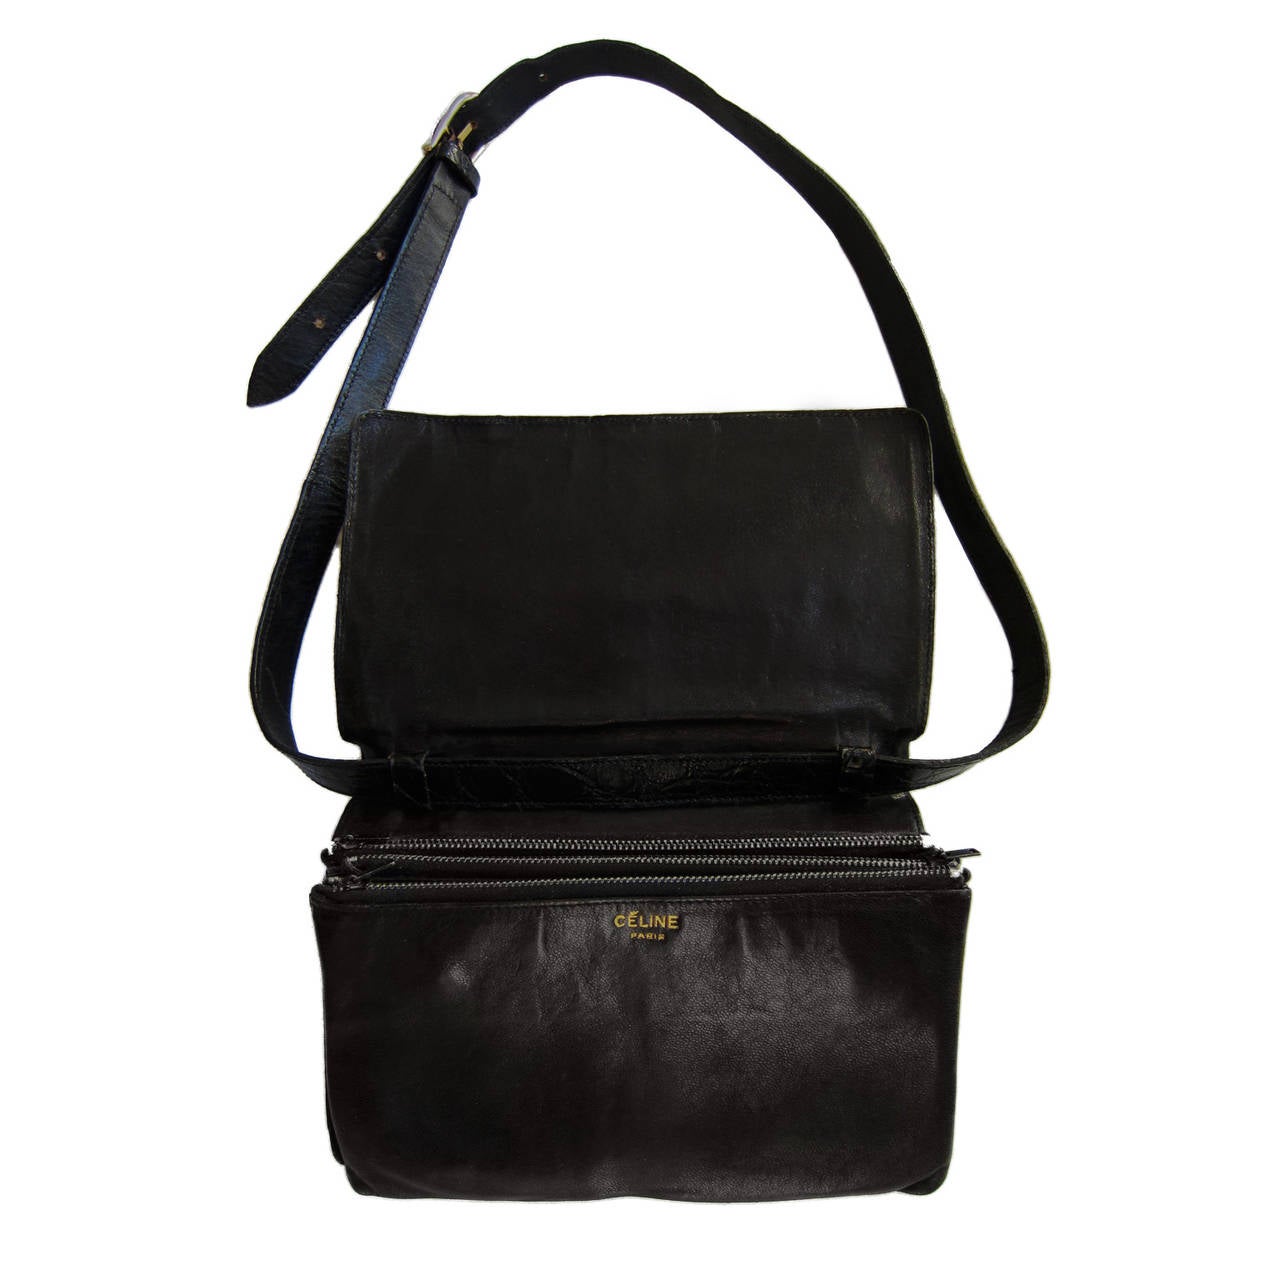 Classic 1970's Celine trio shoulder bag in Black Crocodile. Three zip compartment, belted flap with adjustable shoulder strap.
13 x 20.5cm 
Made in Italy